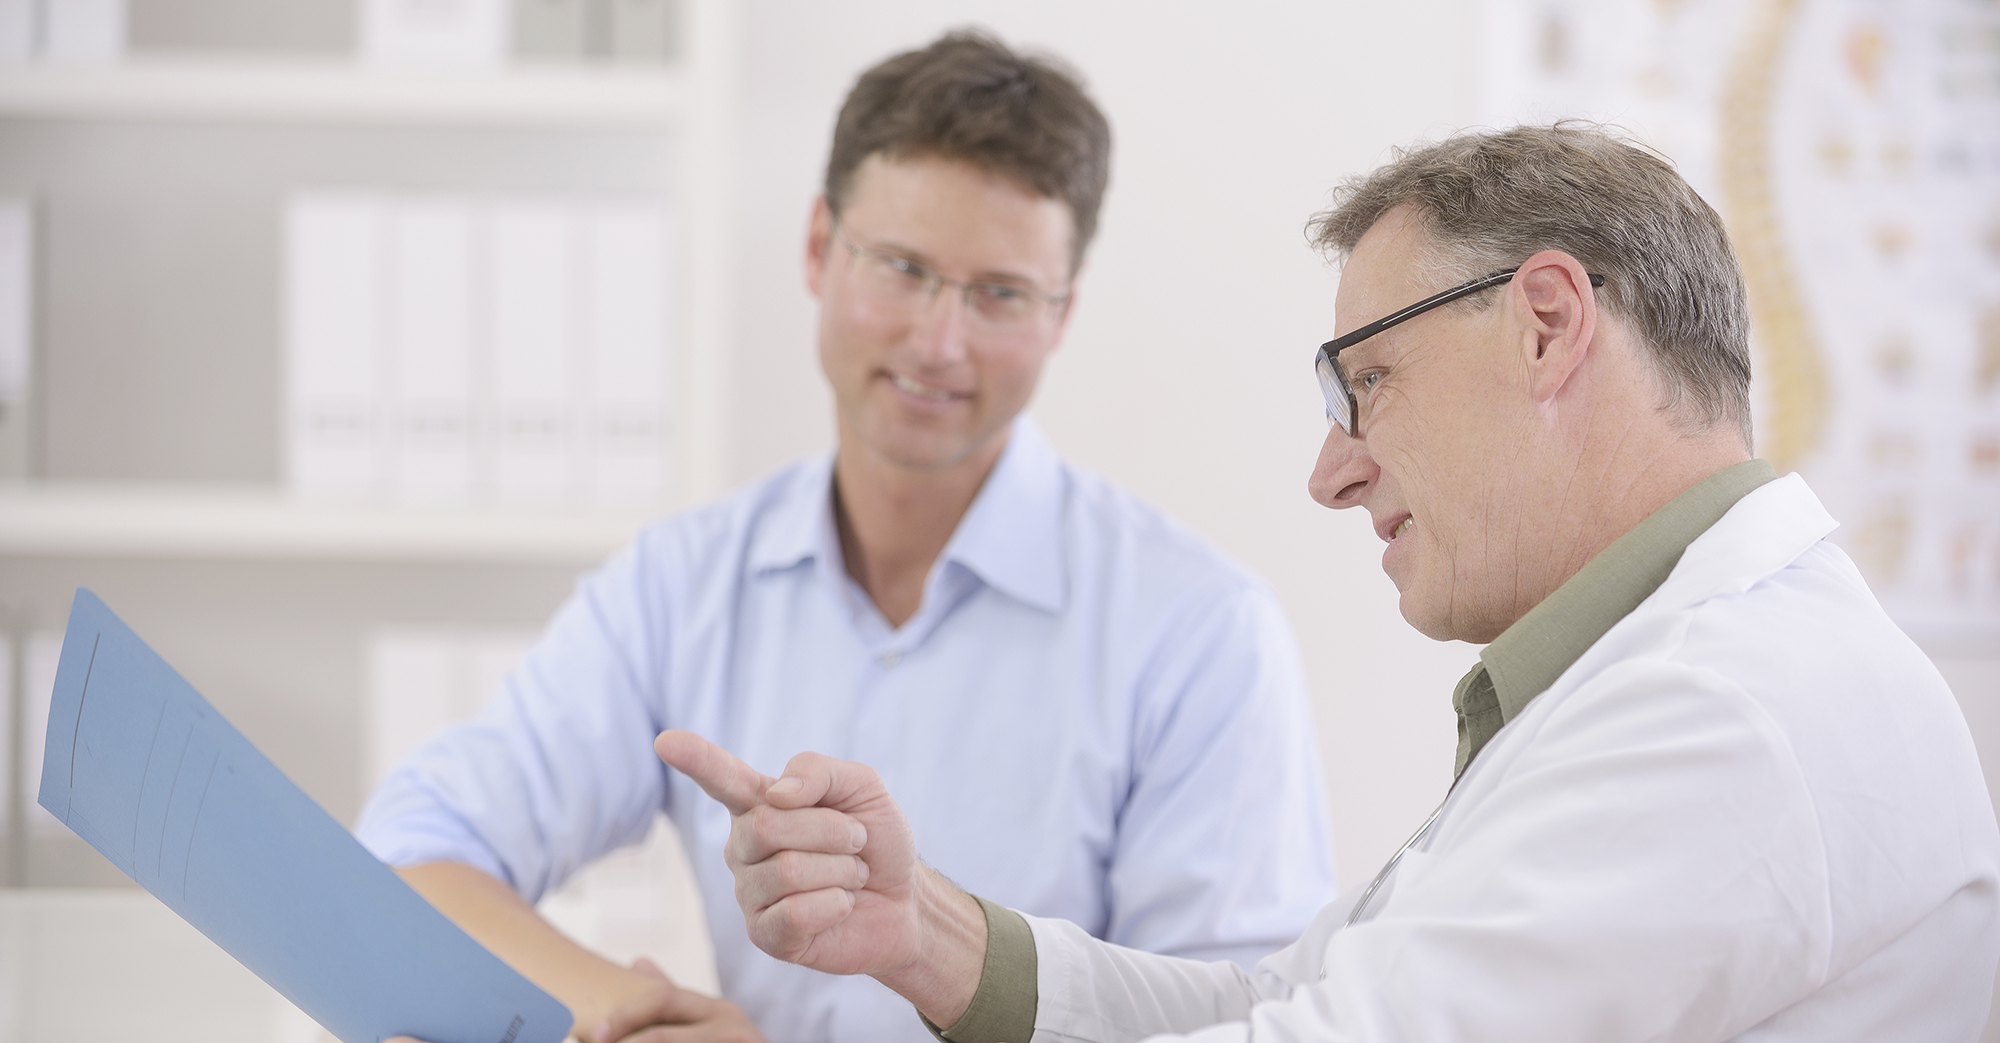 Two doctors looking at and discussing the results of a patient.